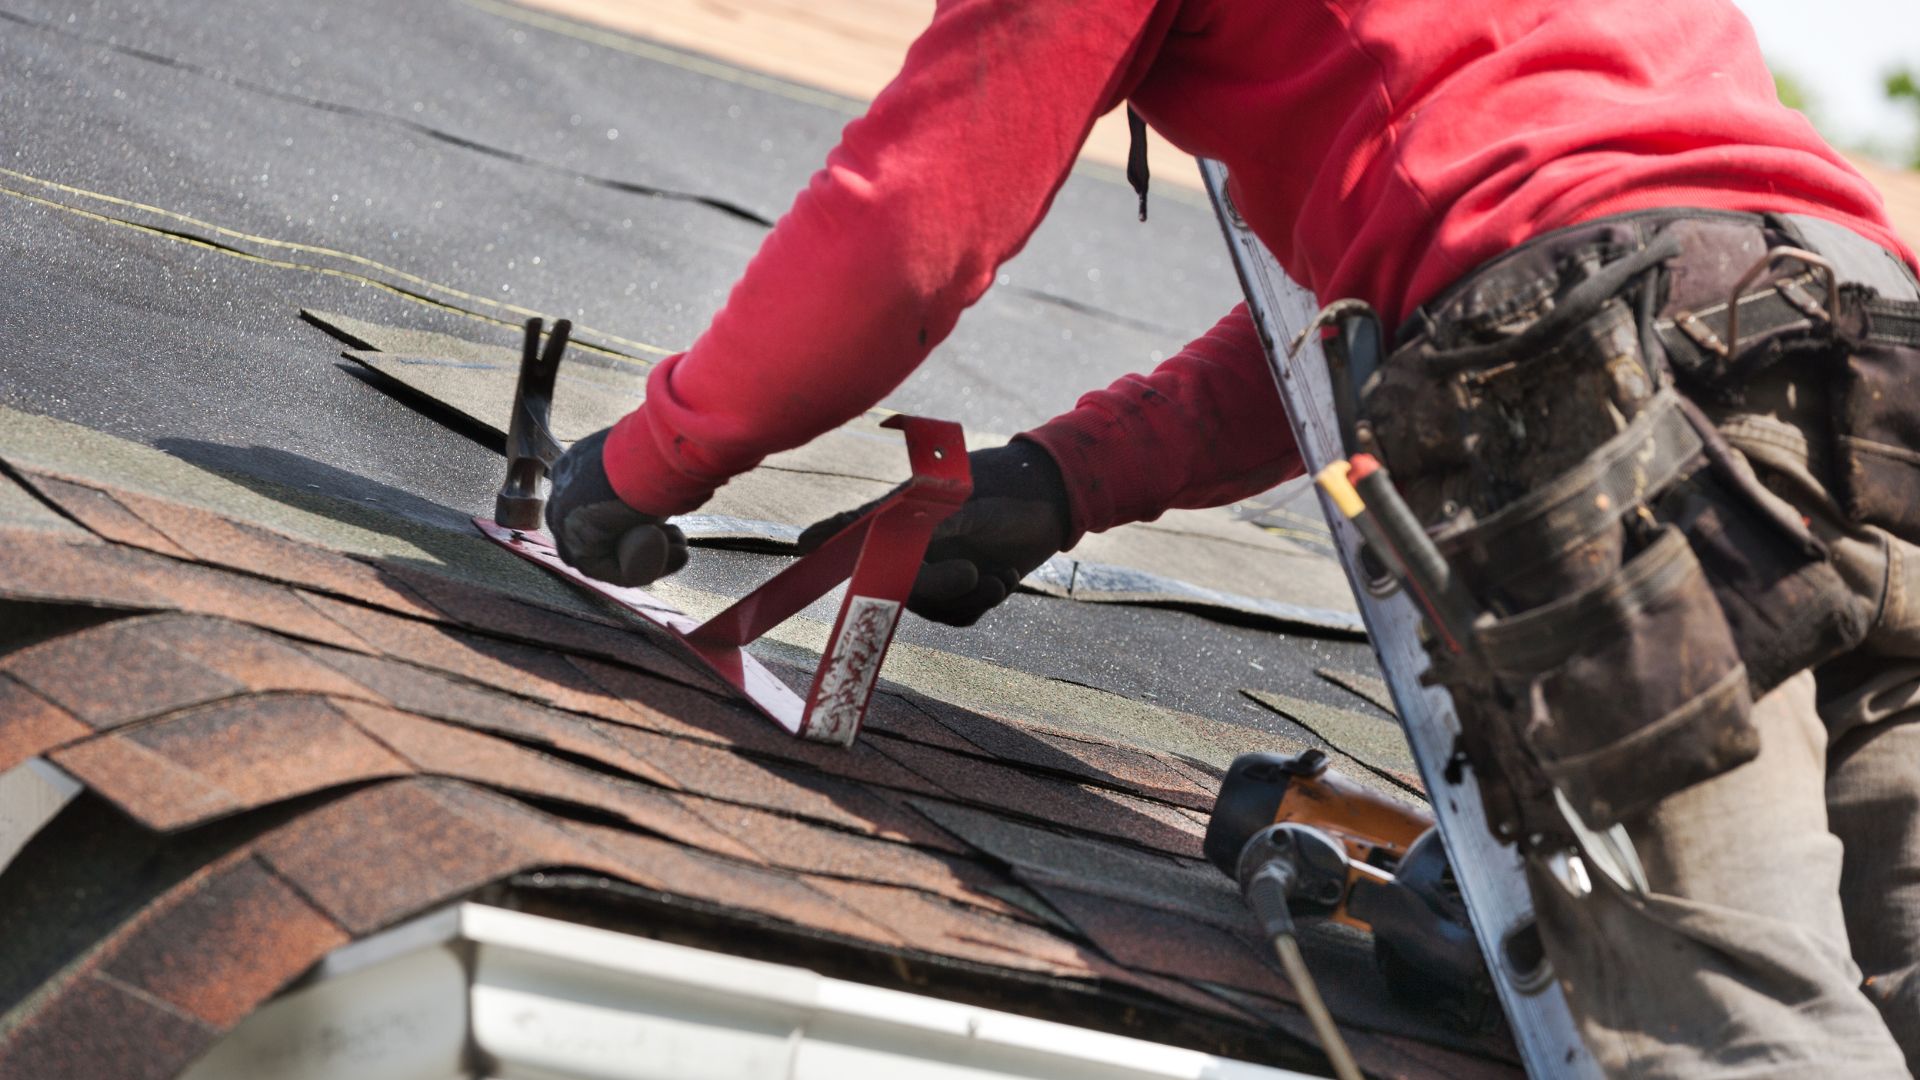 Fort Worth roofing